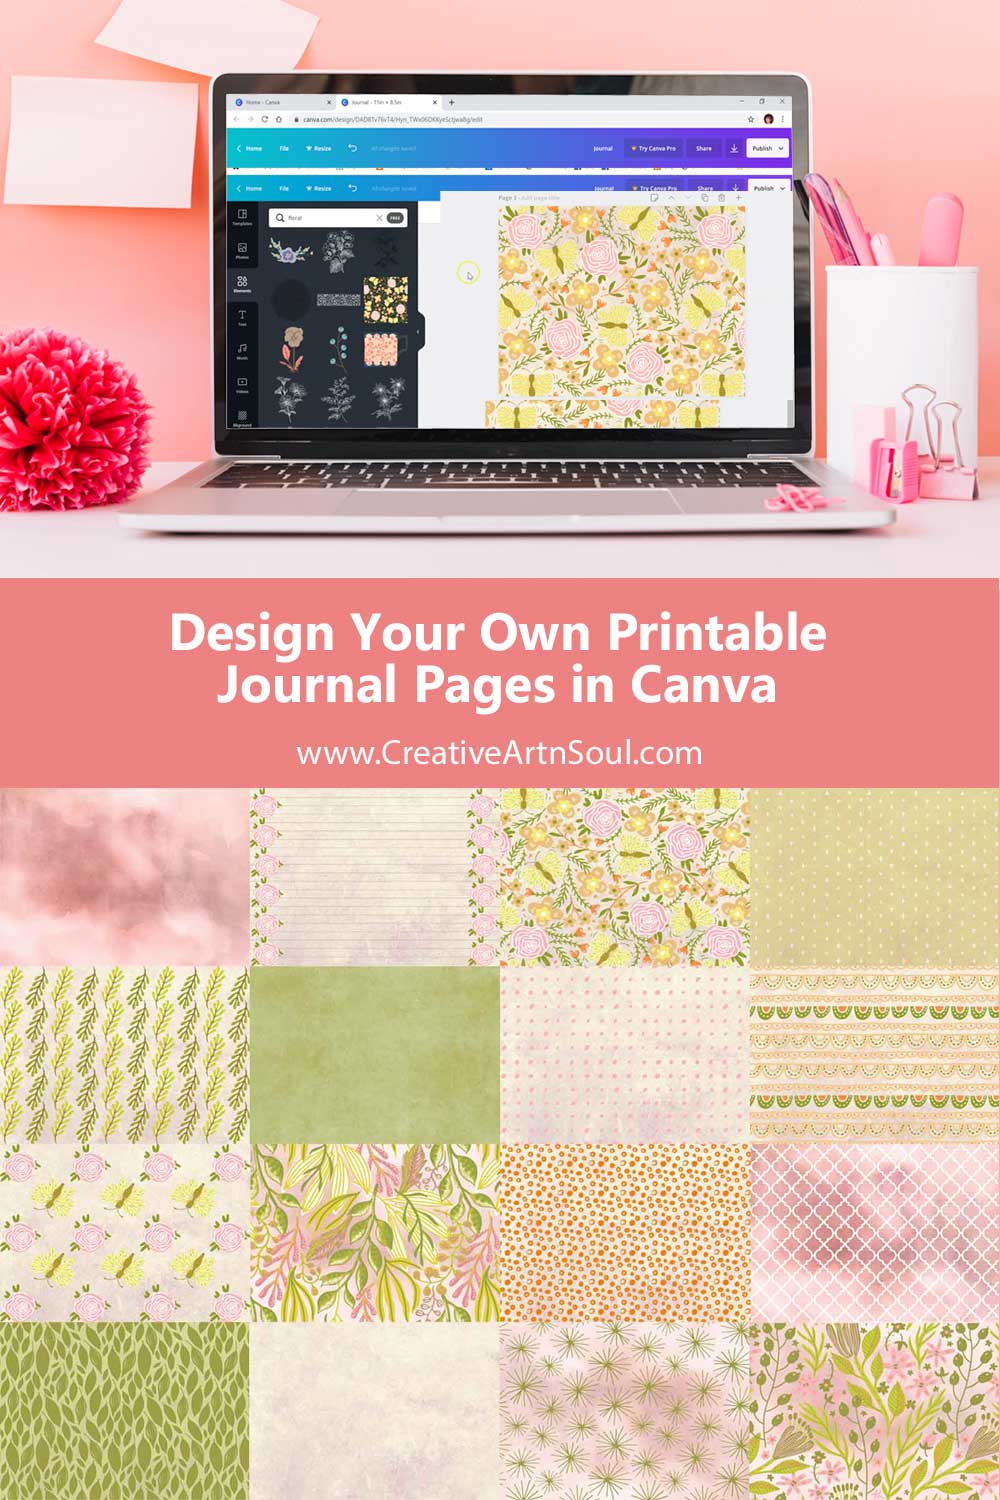 Design Your Own Printable Journal Pages in Canva